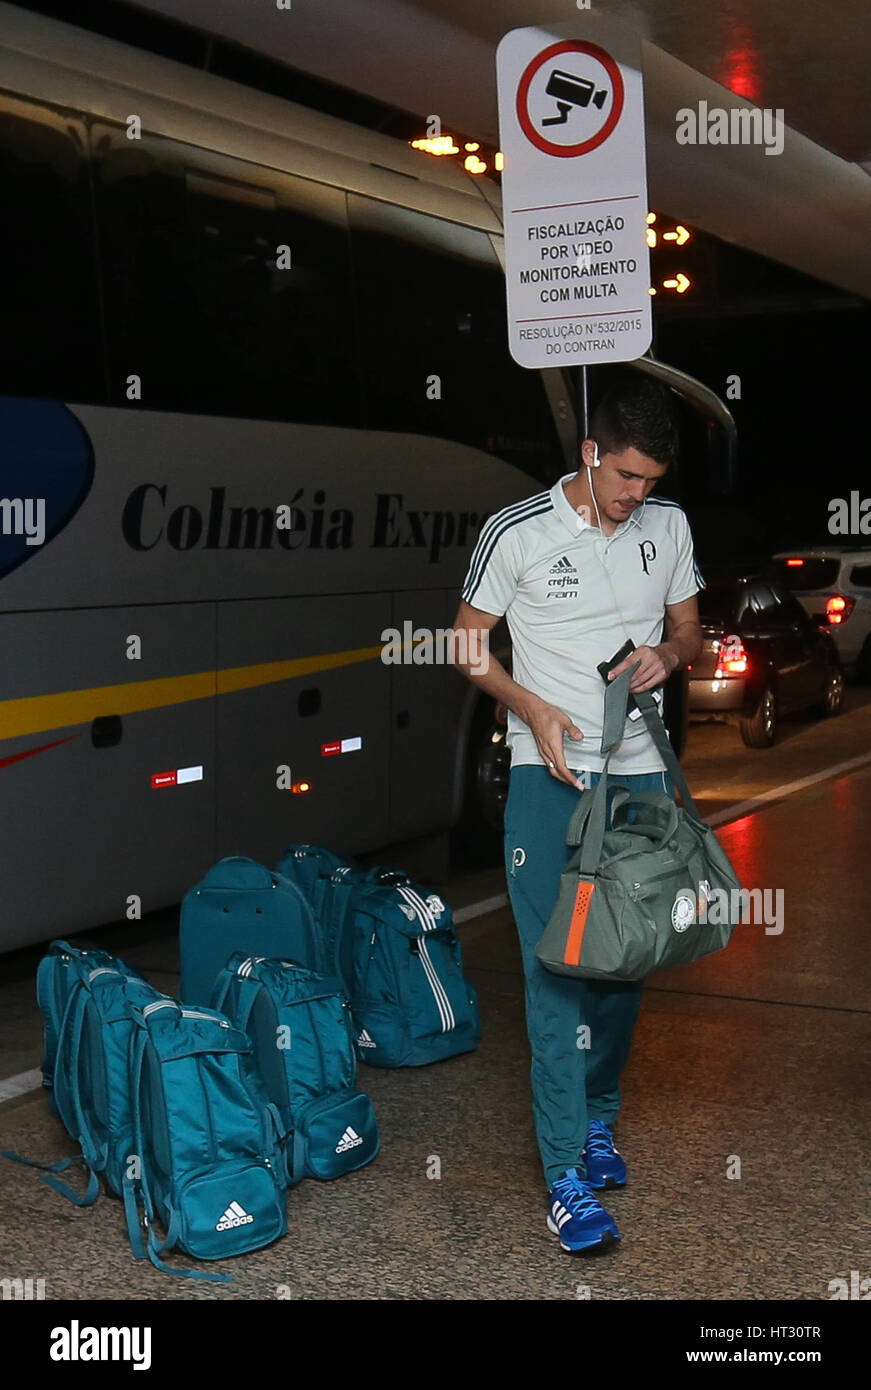 Guarulhos, Brazil. 06th Mar, 2017. The goalkeeper Vinicius, the SE Palmeiras during boarding, at Guarulhos International Airport, to the city of San Miguel de Tucuman, Argentina. Credit: Cesar Greco/FotoArena/Alamy Live News Stock Photo